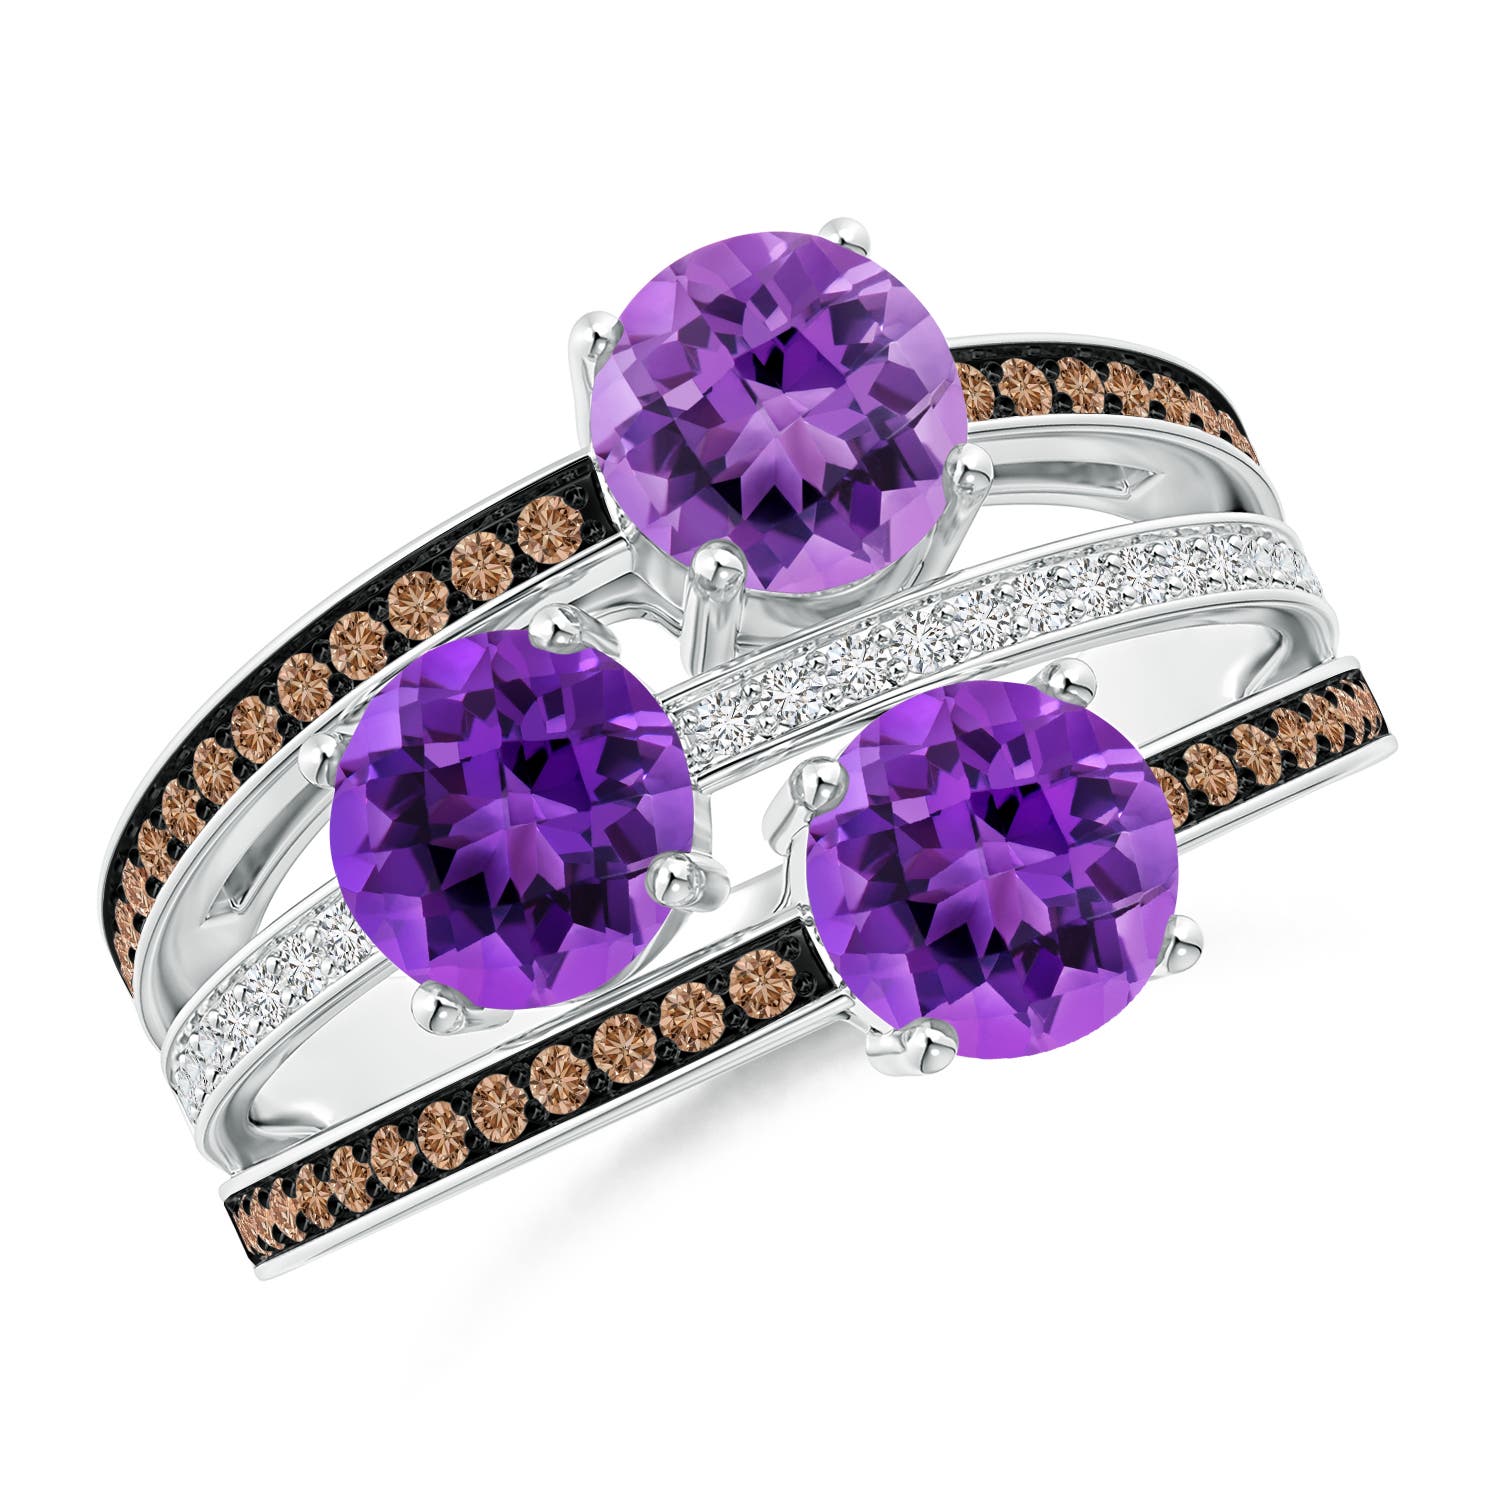 AAA - Amethyst / 2.76 CT / 14 KT White Gold